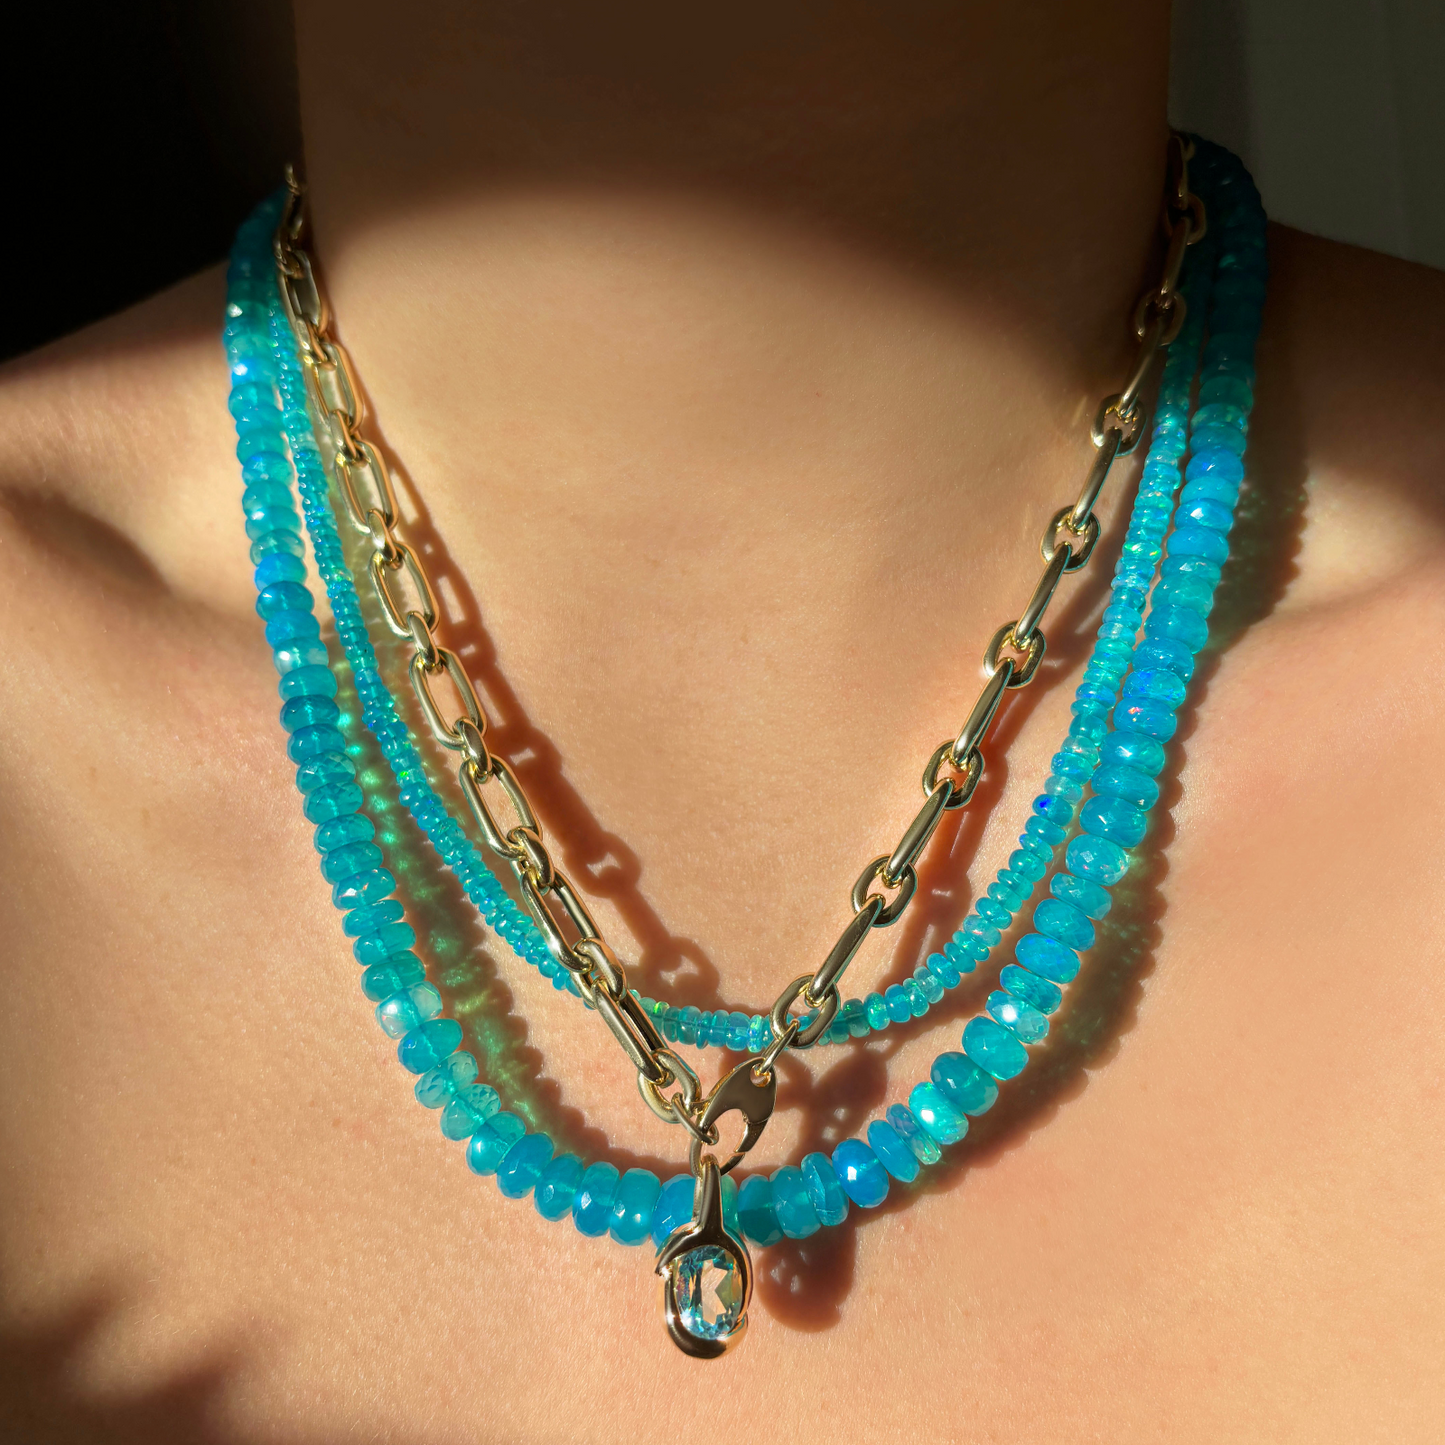 Mediterranean Blue Faceted Opal Necklace